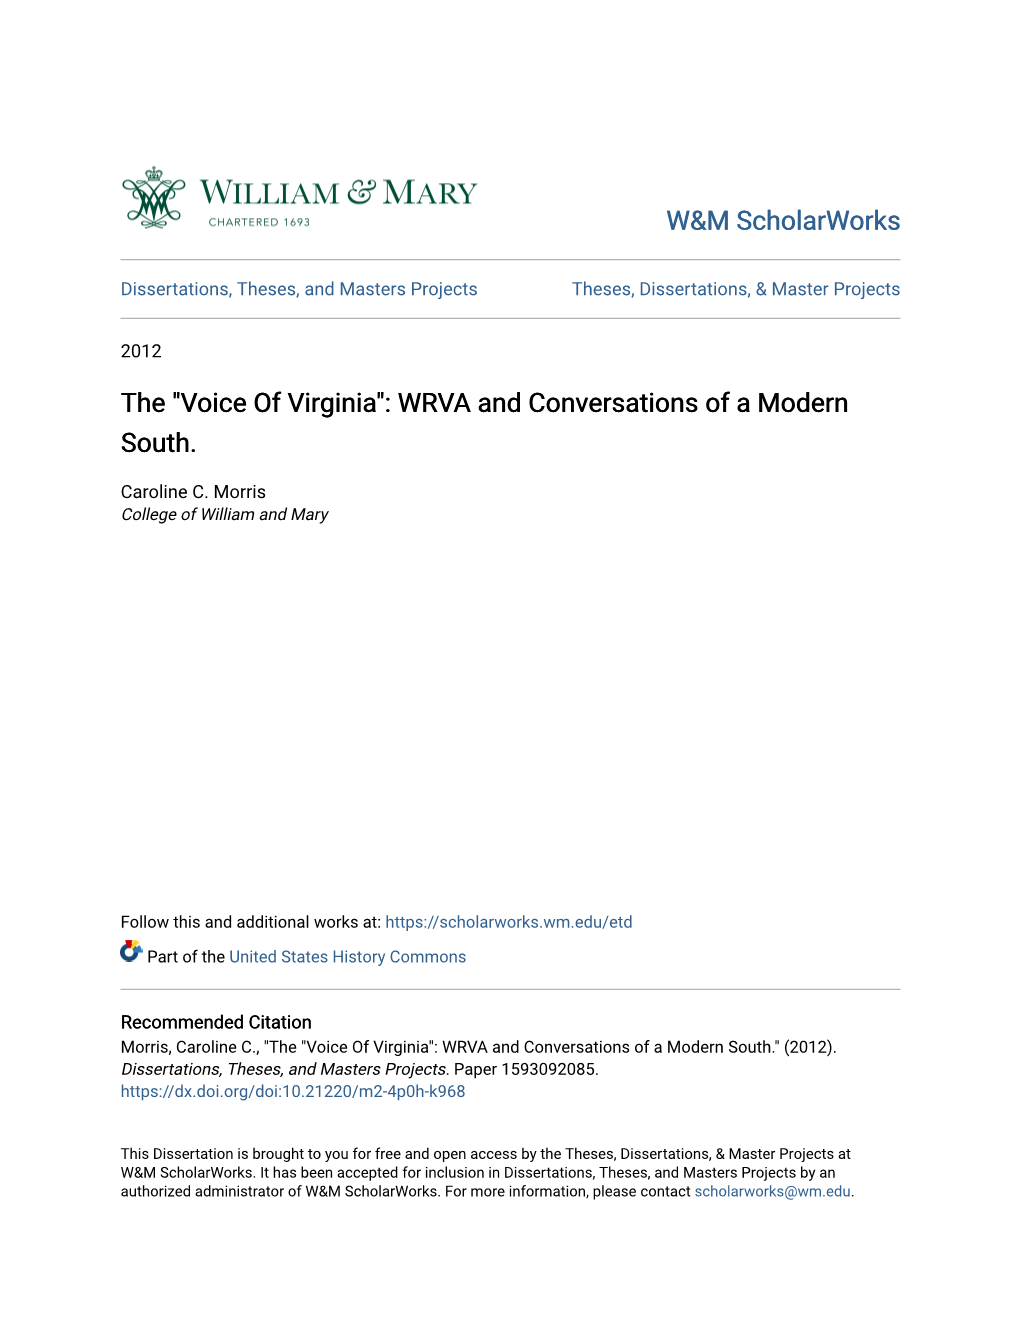 The "Voice of Virginia": WRVA and Conversations of a Modern South